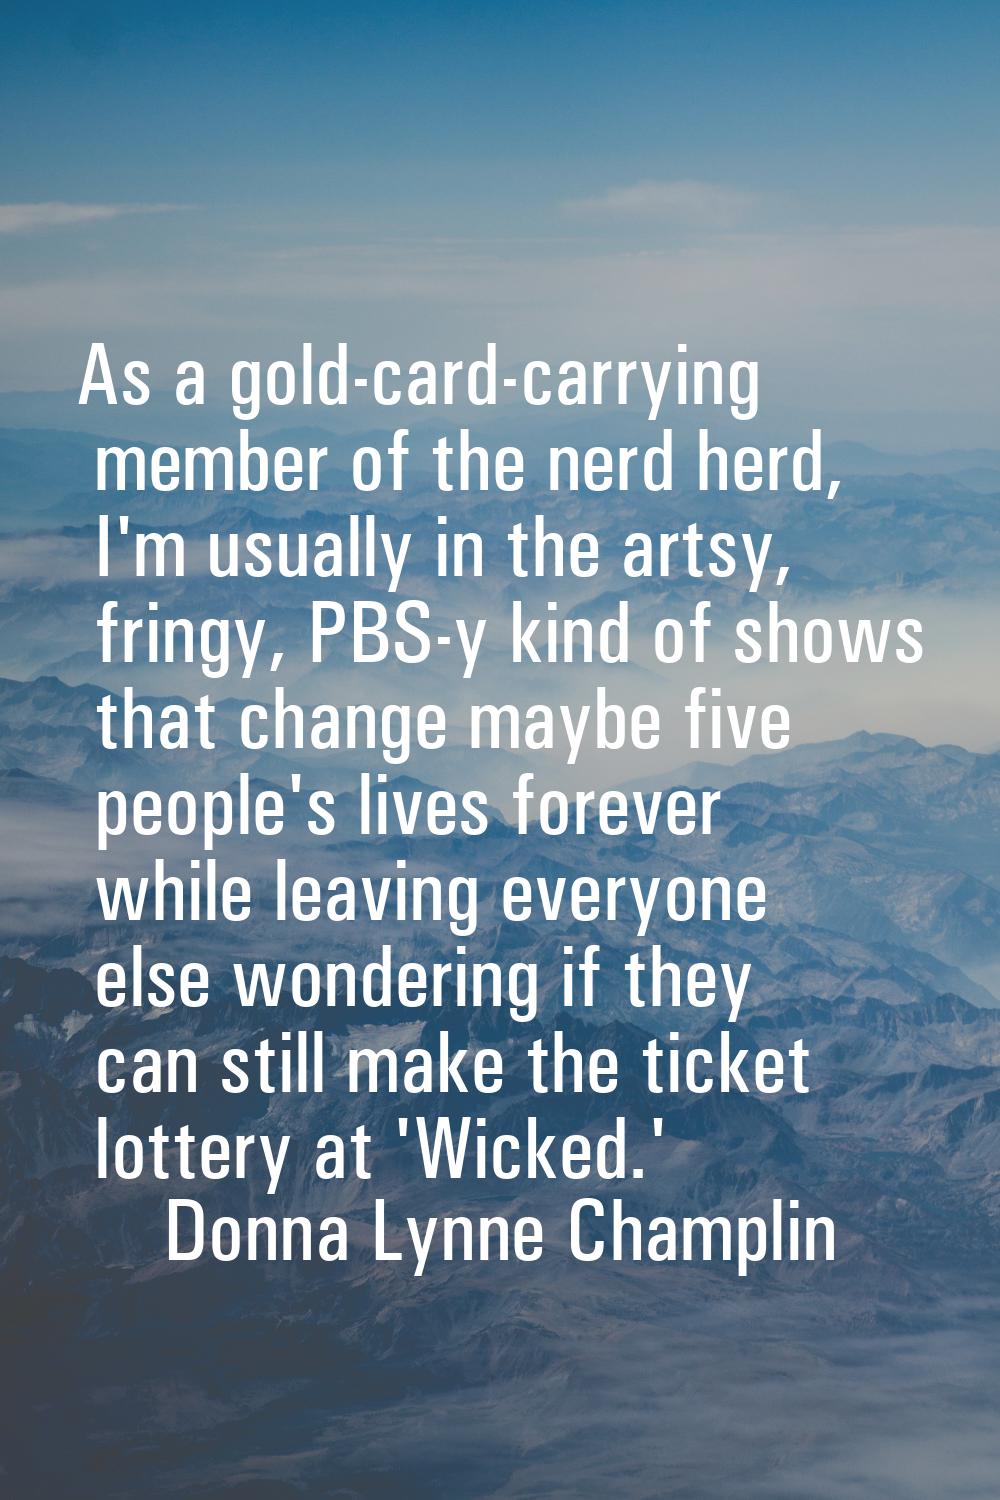 As a gold-card-carrying member of the nerd herd, I'm usually in the artsy, fringy, PBS-y kind of sh